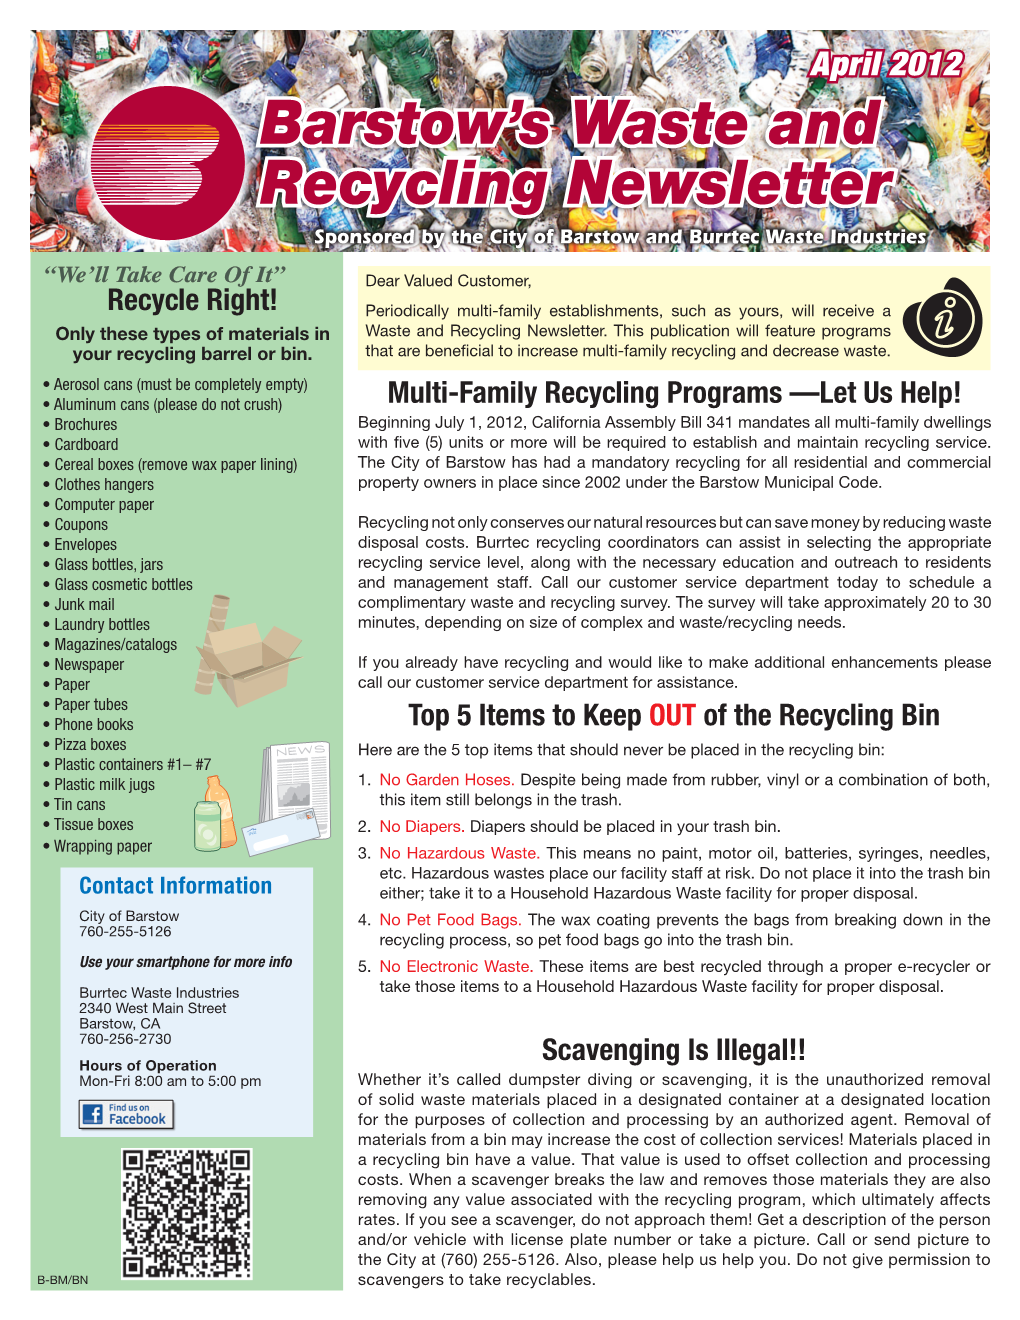 Barstow's Waste and Recycling Newsletter